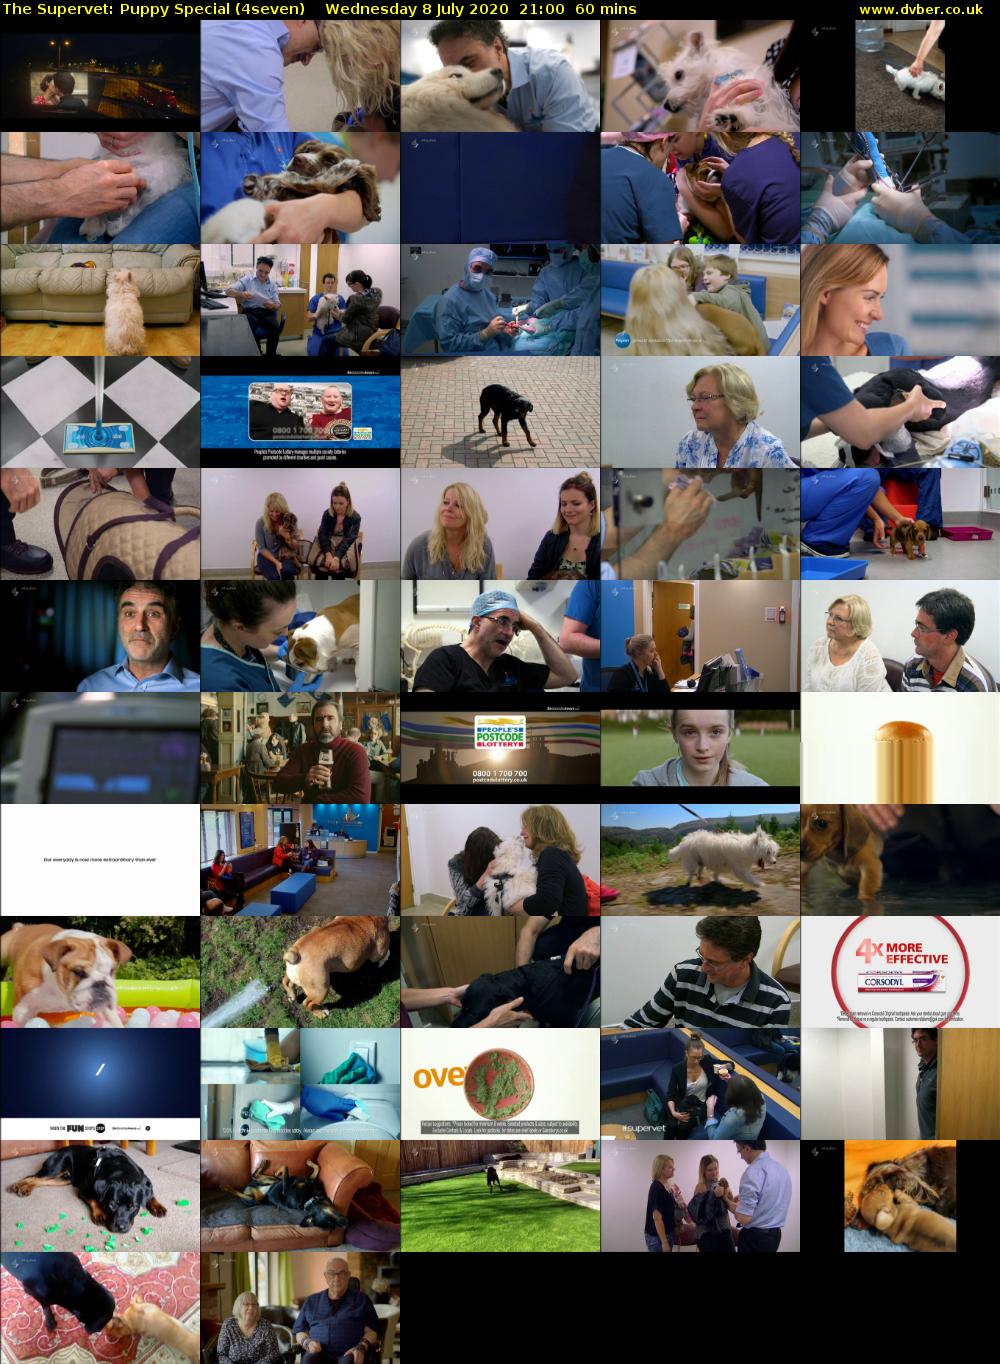 The Supervet: Puppy Special (4seven) Wednesday 8 July 2020 21:00 - 22:00